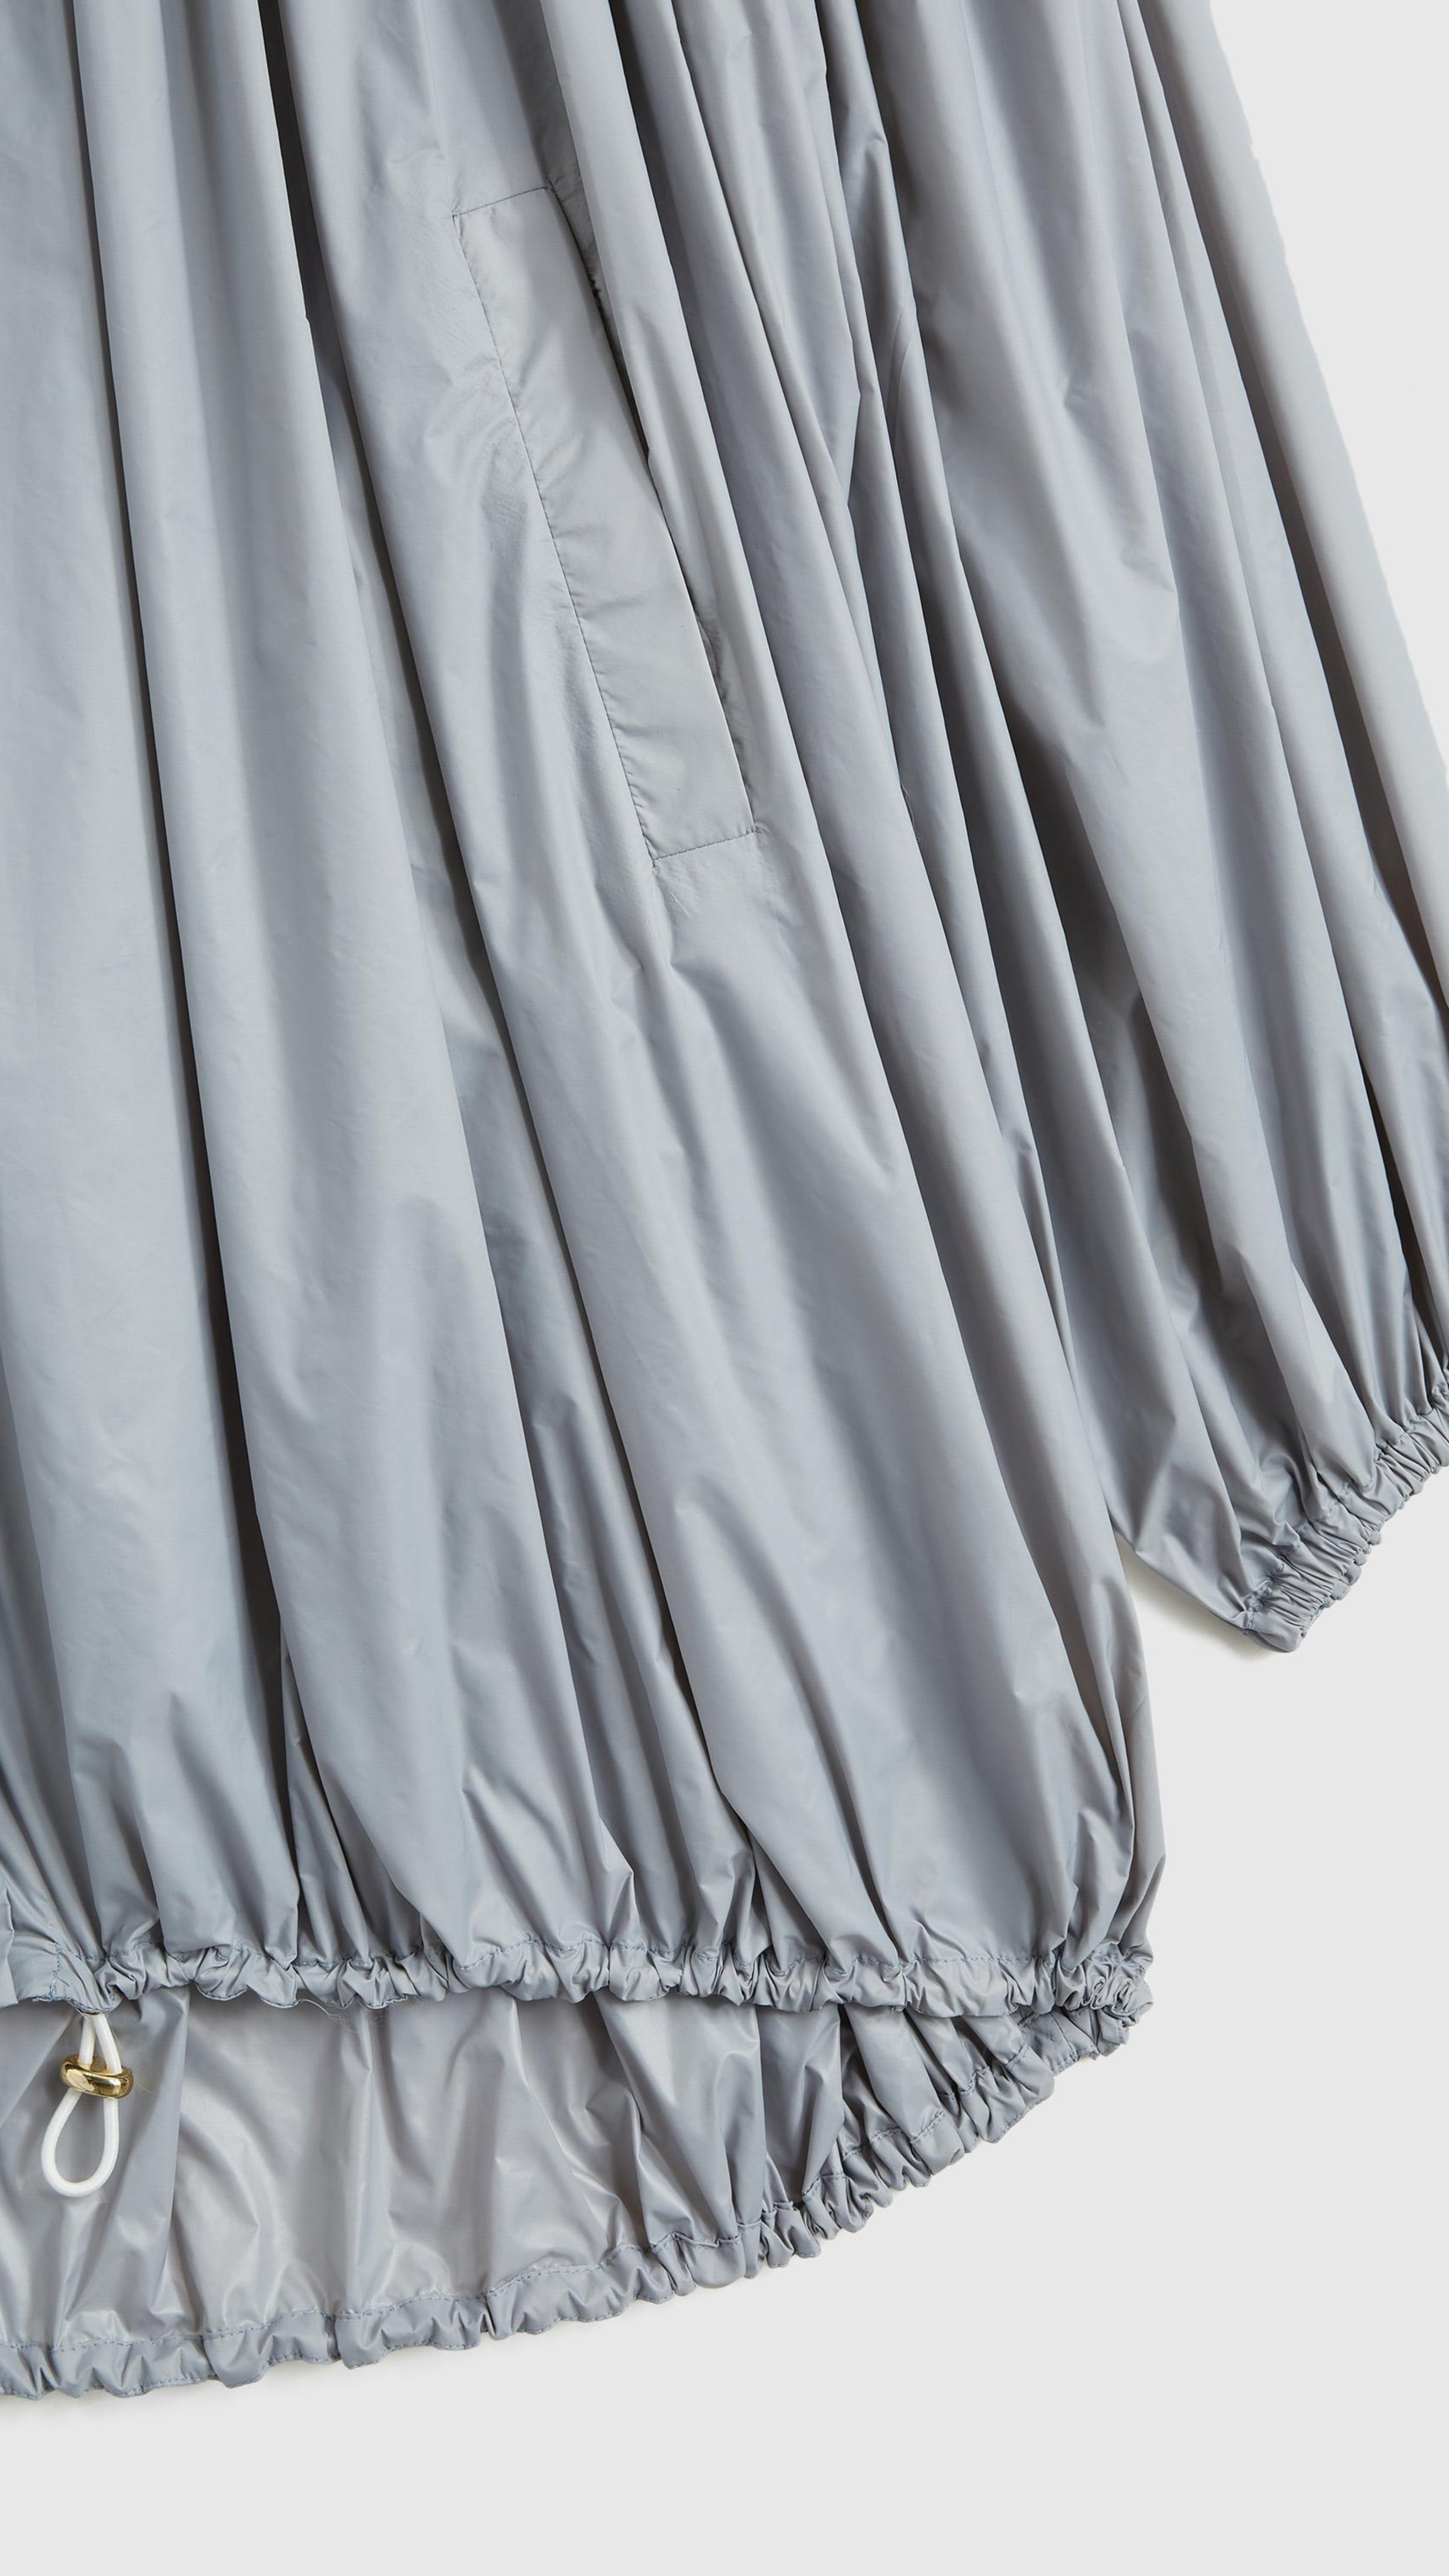 Rochas Paris Fashion Oversized Wind Jacket in a sky silver blue. Pleated draping across the front makes this elegant and luxurious outerwear jacket. Detail photo showing sleeve and drawstring hemline detail.